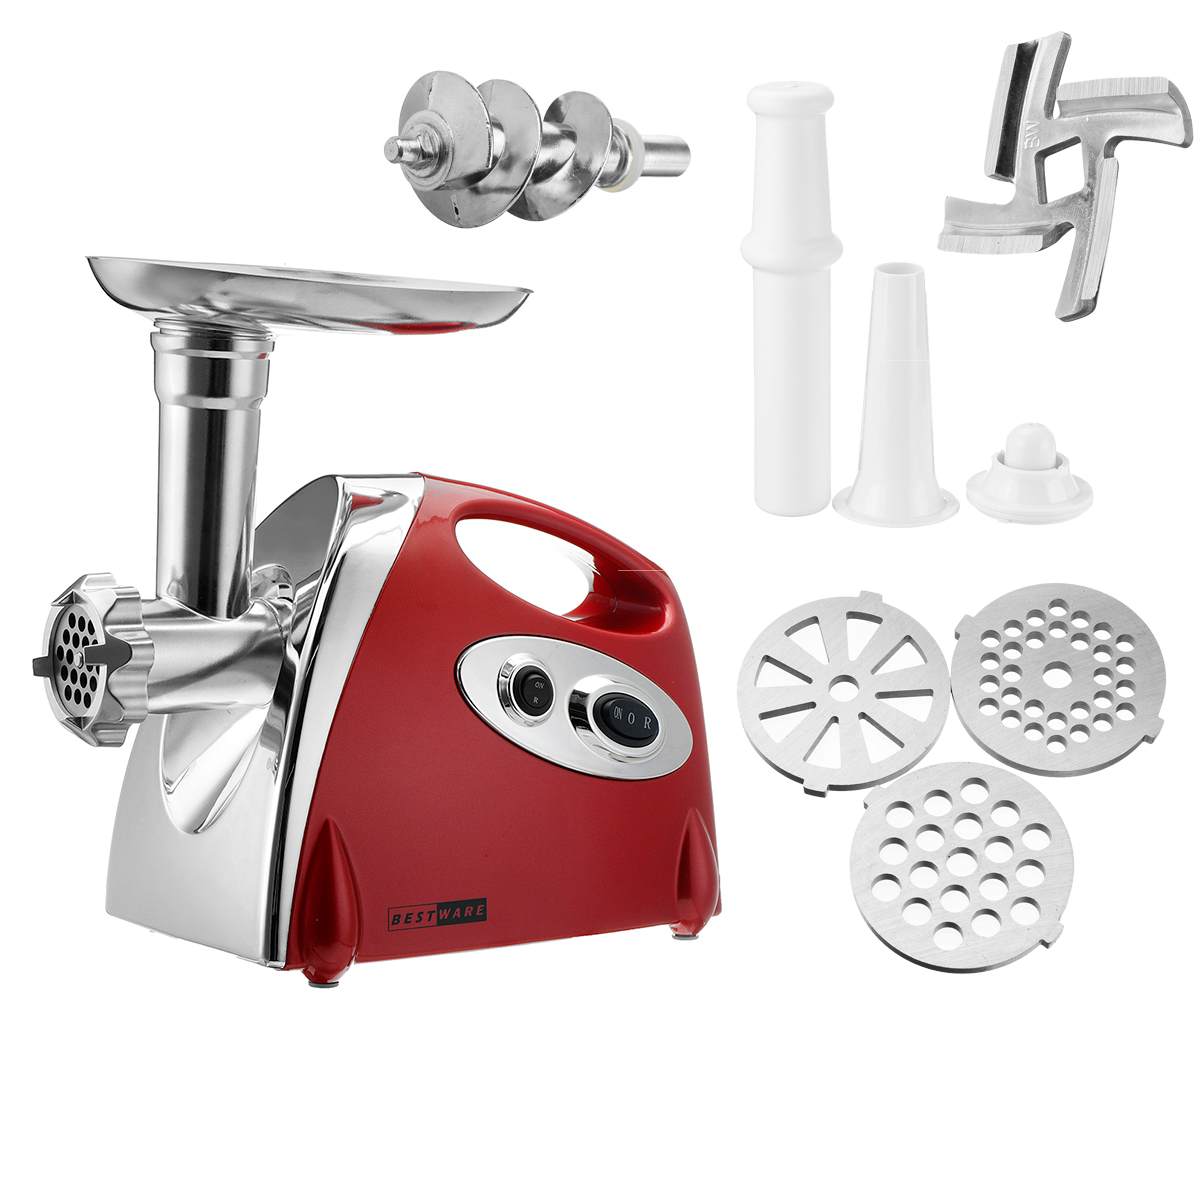 Electric multifunctional meat grinder